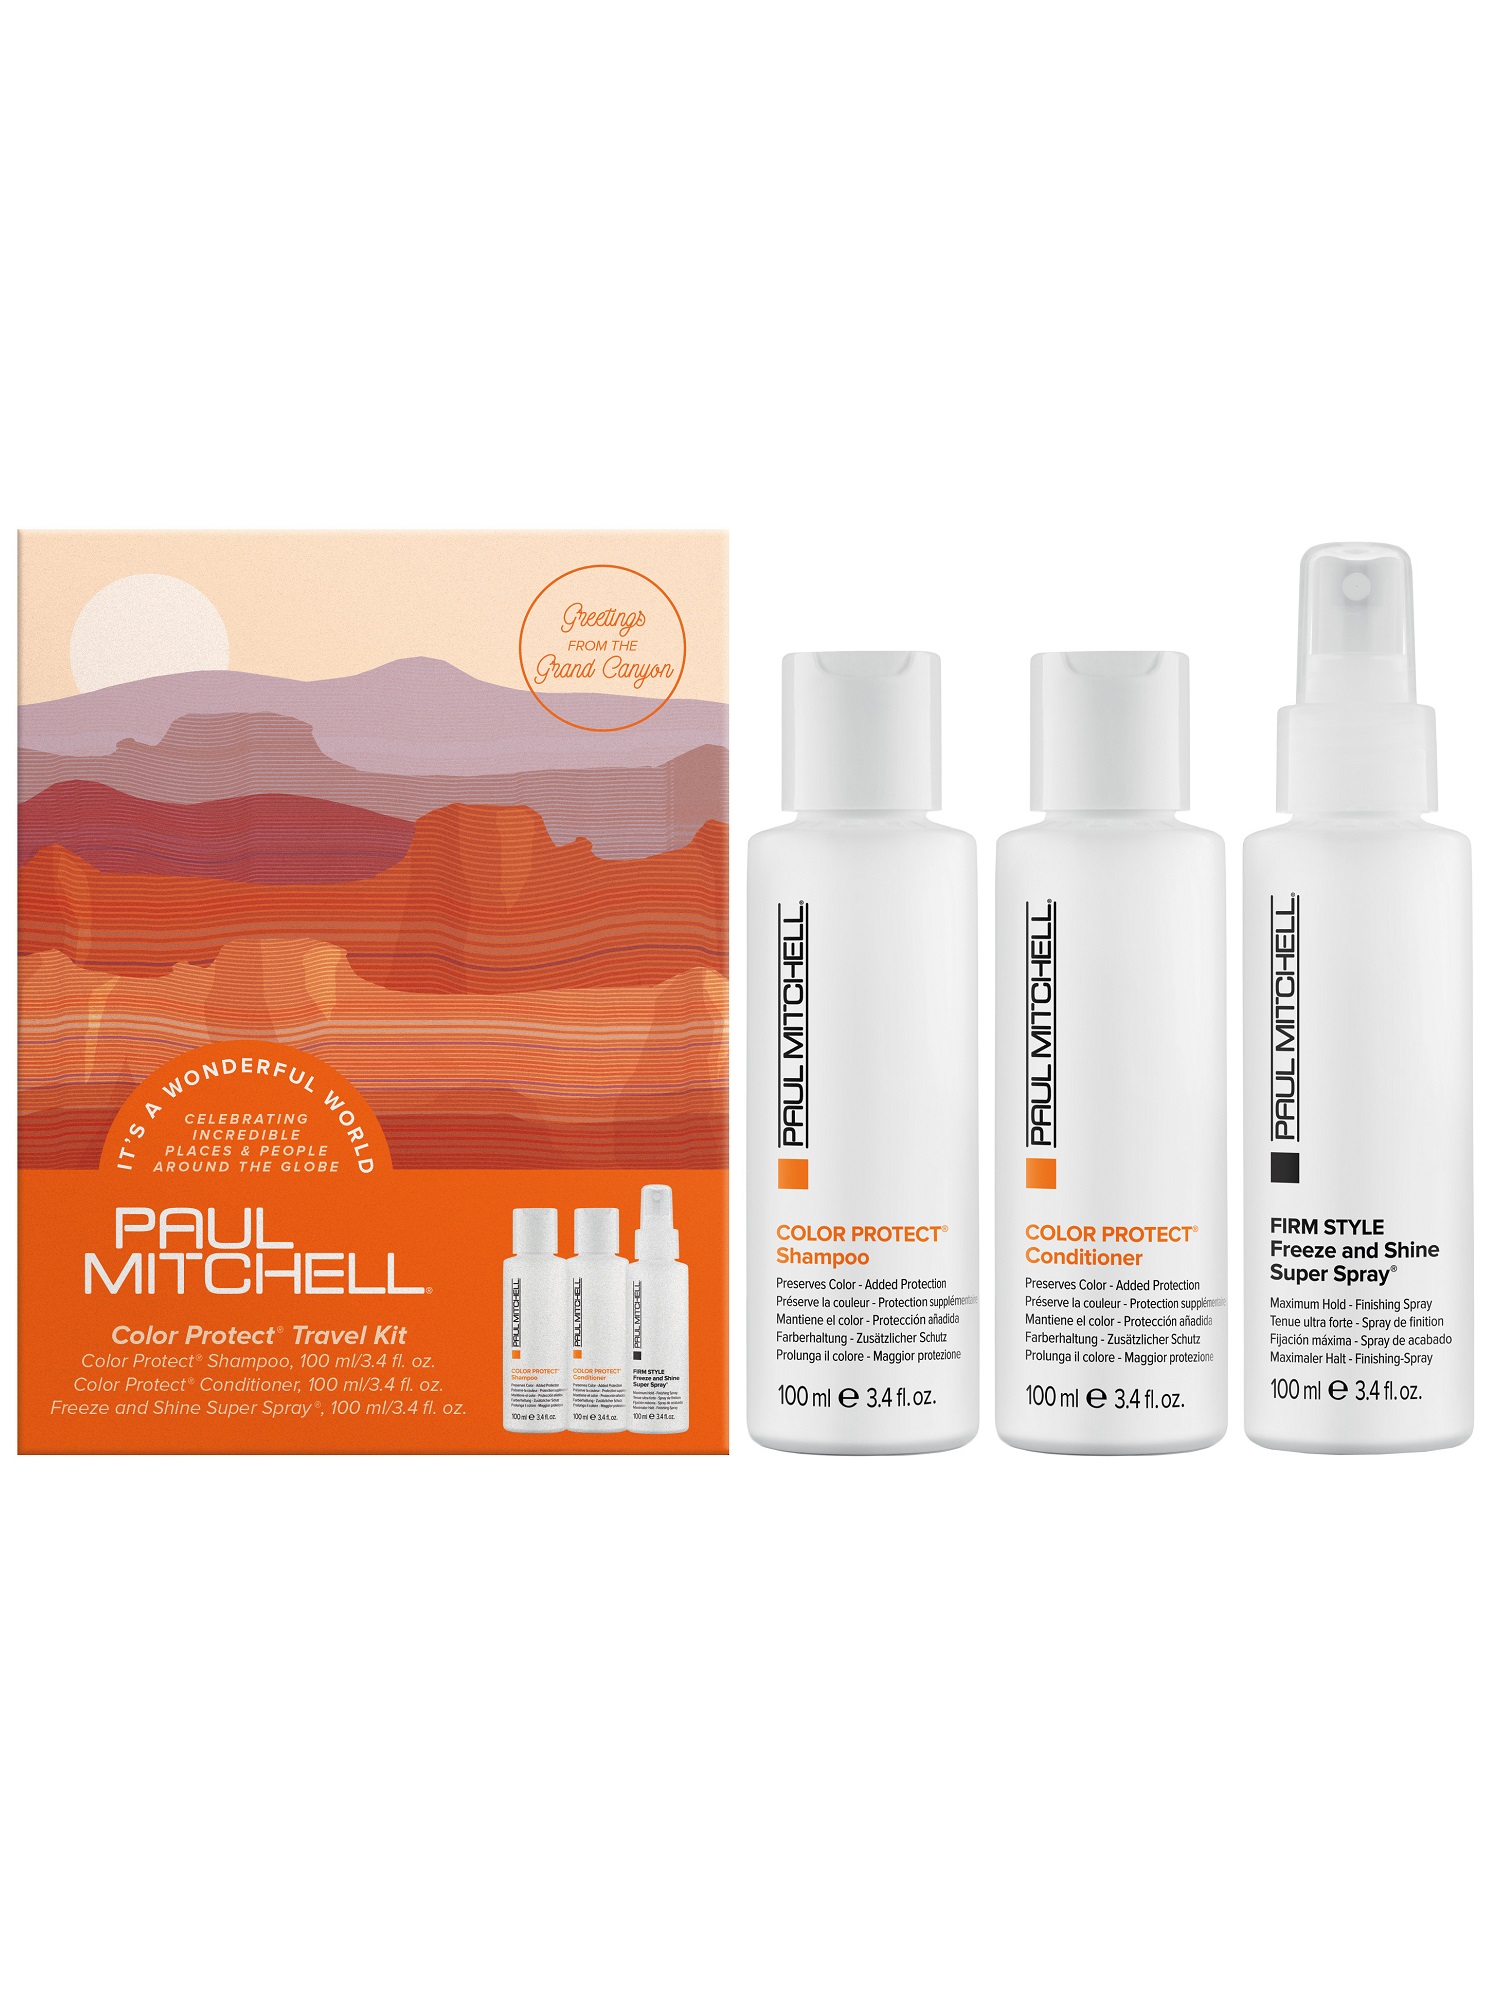 Paul Mitchell Color Protect Travel Kit